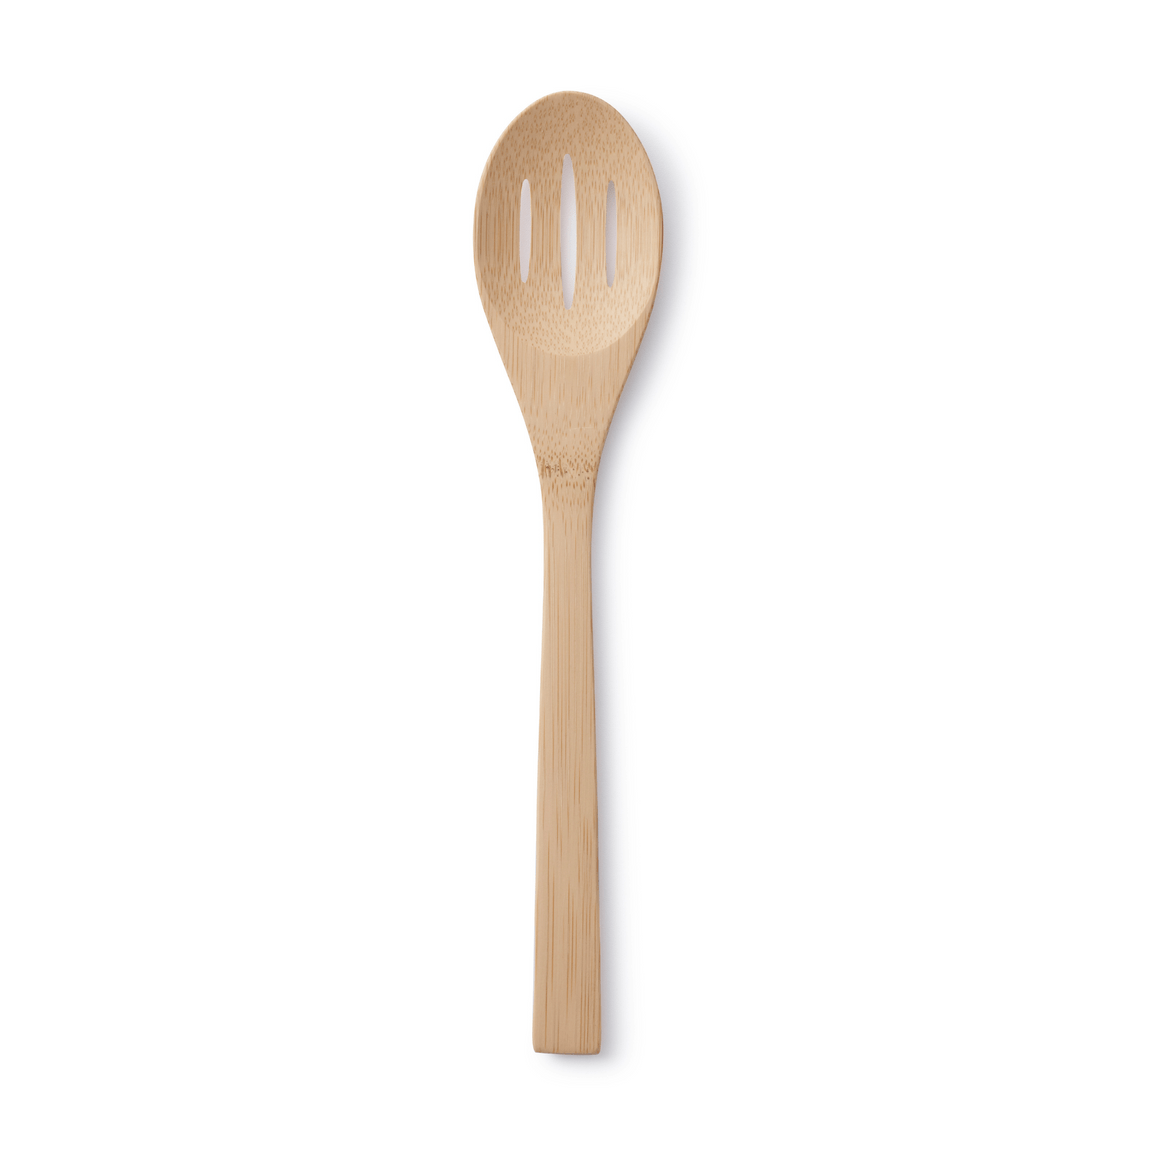 'Give It a Rest' Bamboo Slotted Spoon - Echo Market